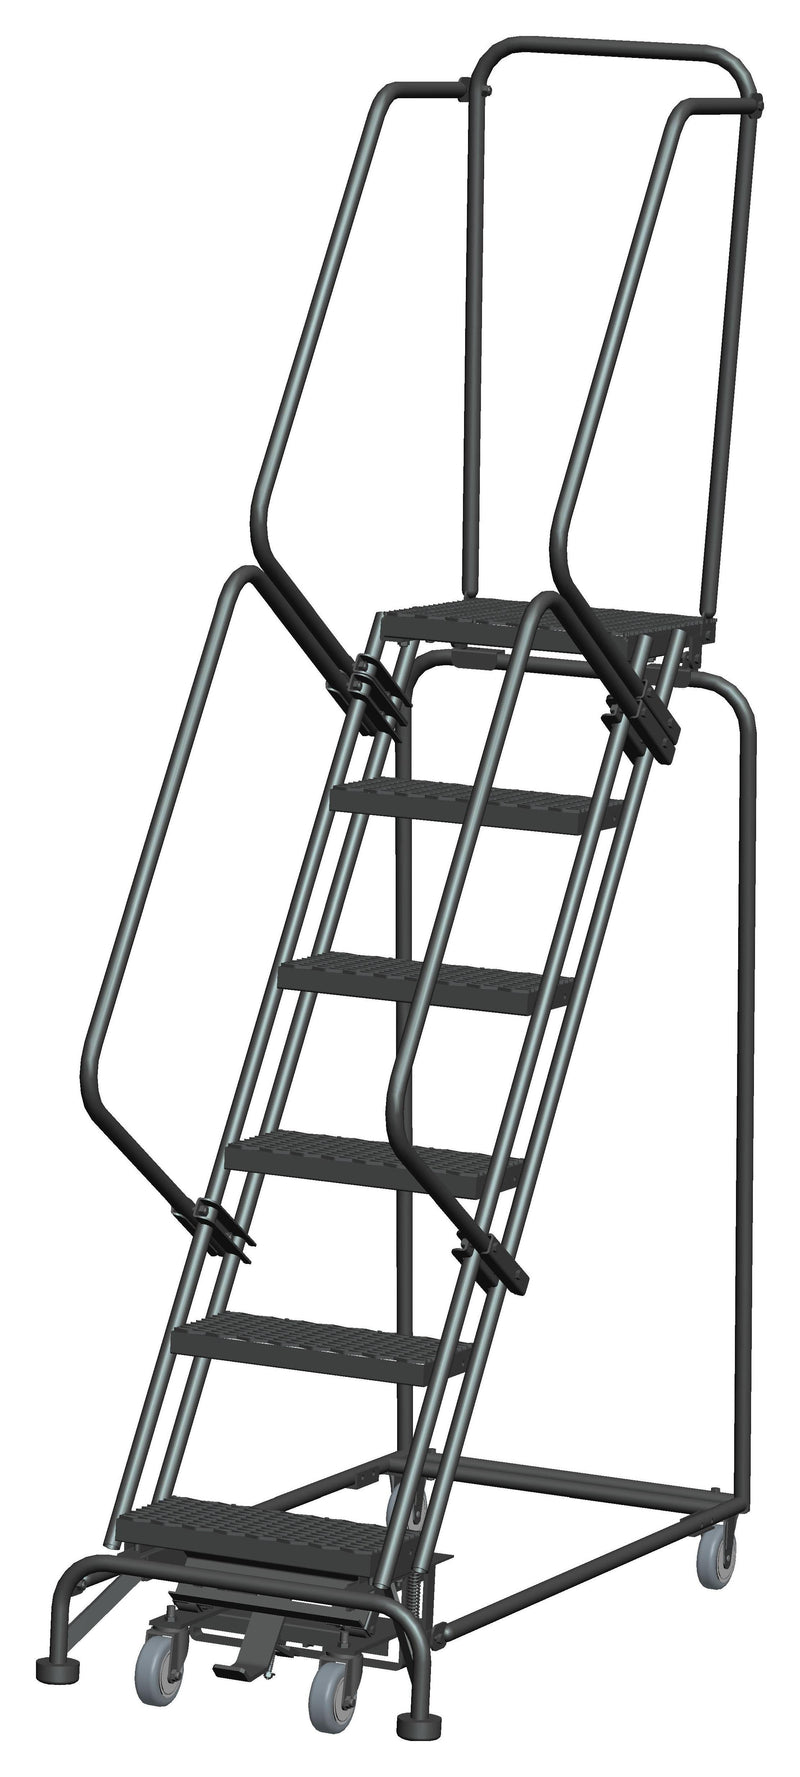 Rolling Ladder - Weight-Actuated - 6 Step, Handrails - Ballymore